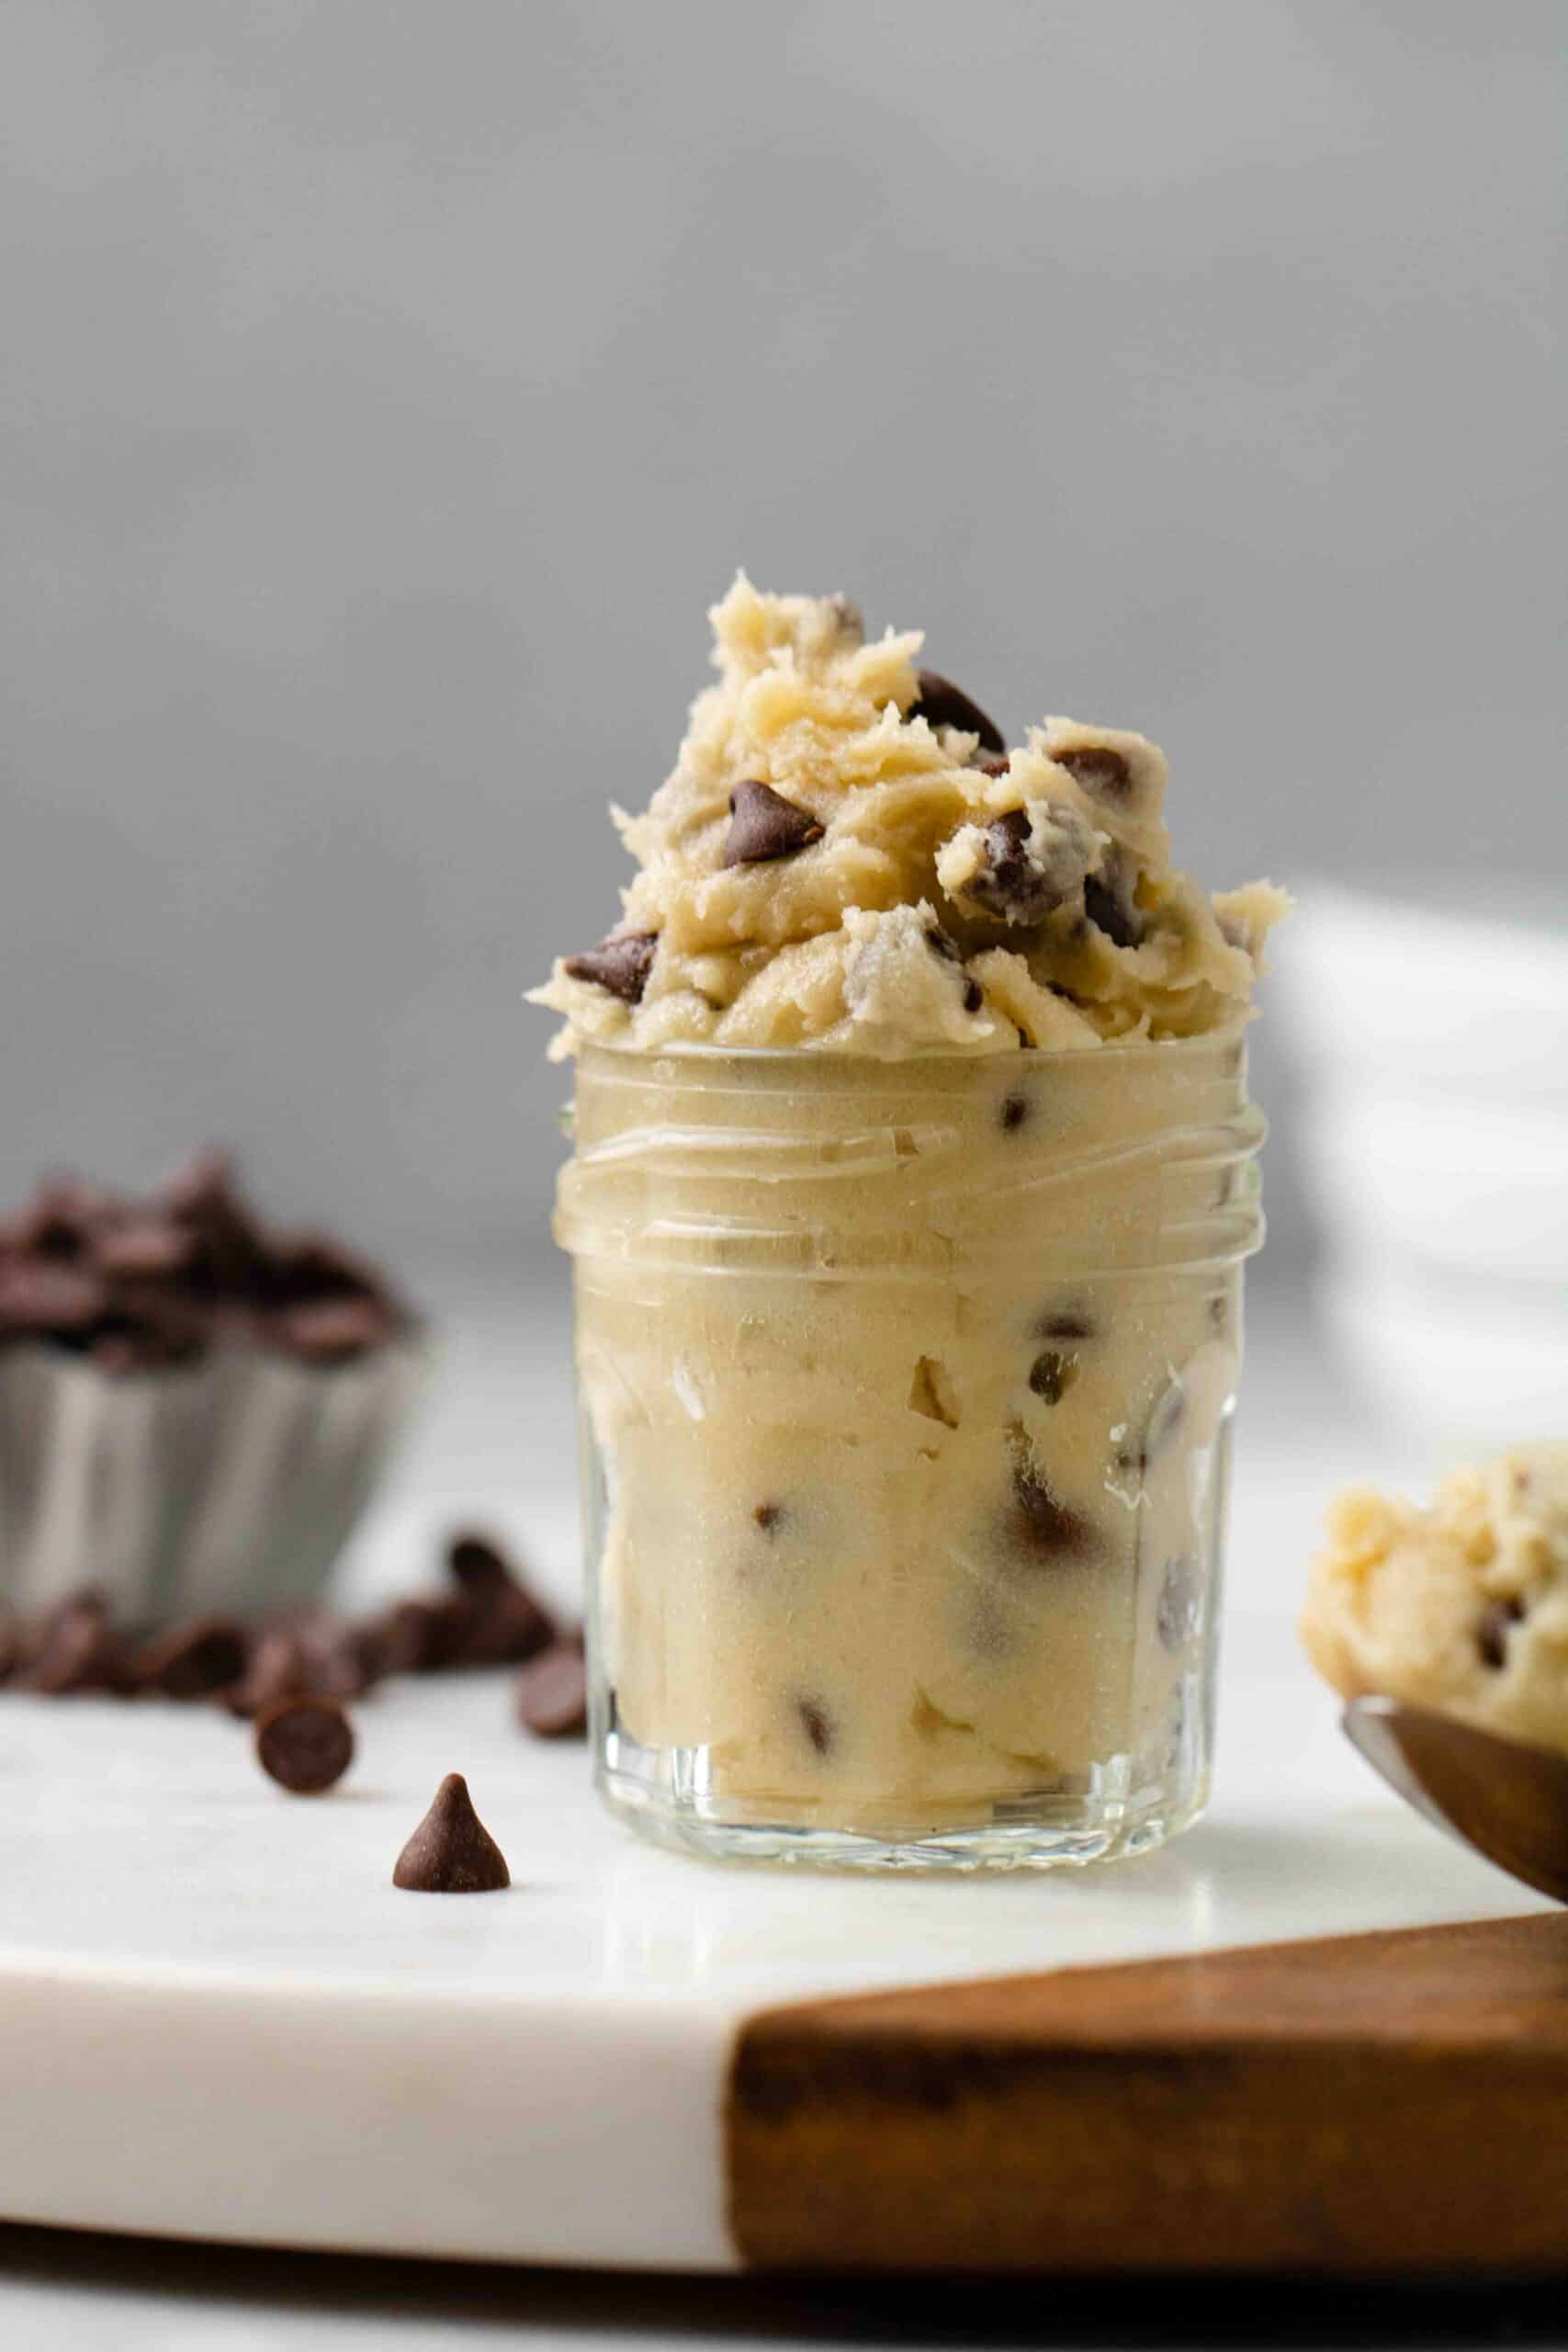 https://lifestyleofafoodie.com/wp-content/uploads/2021/01/Chocolate-chip-edible-cookie-dough-for-one-3-variations-13-of-26-scaled.jpg